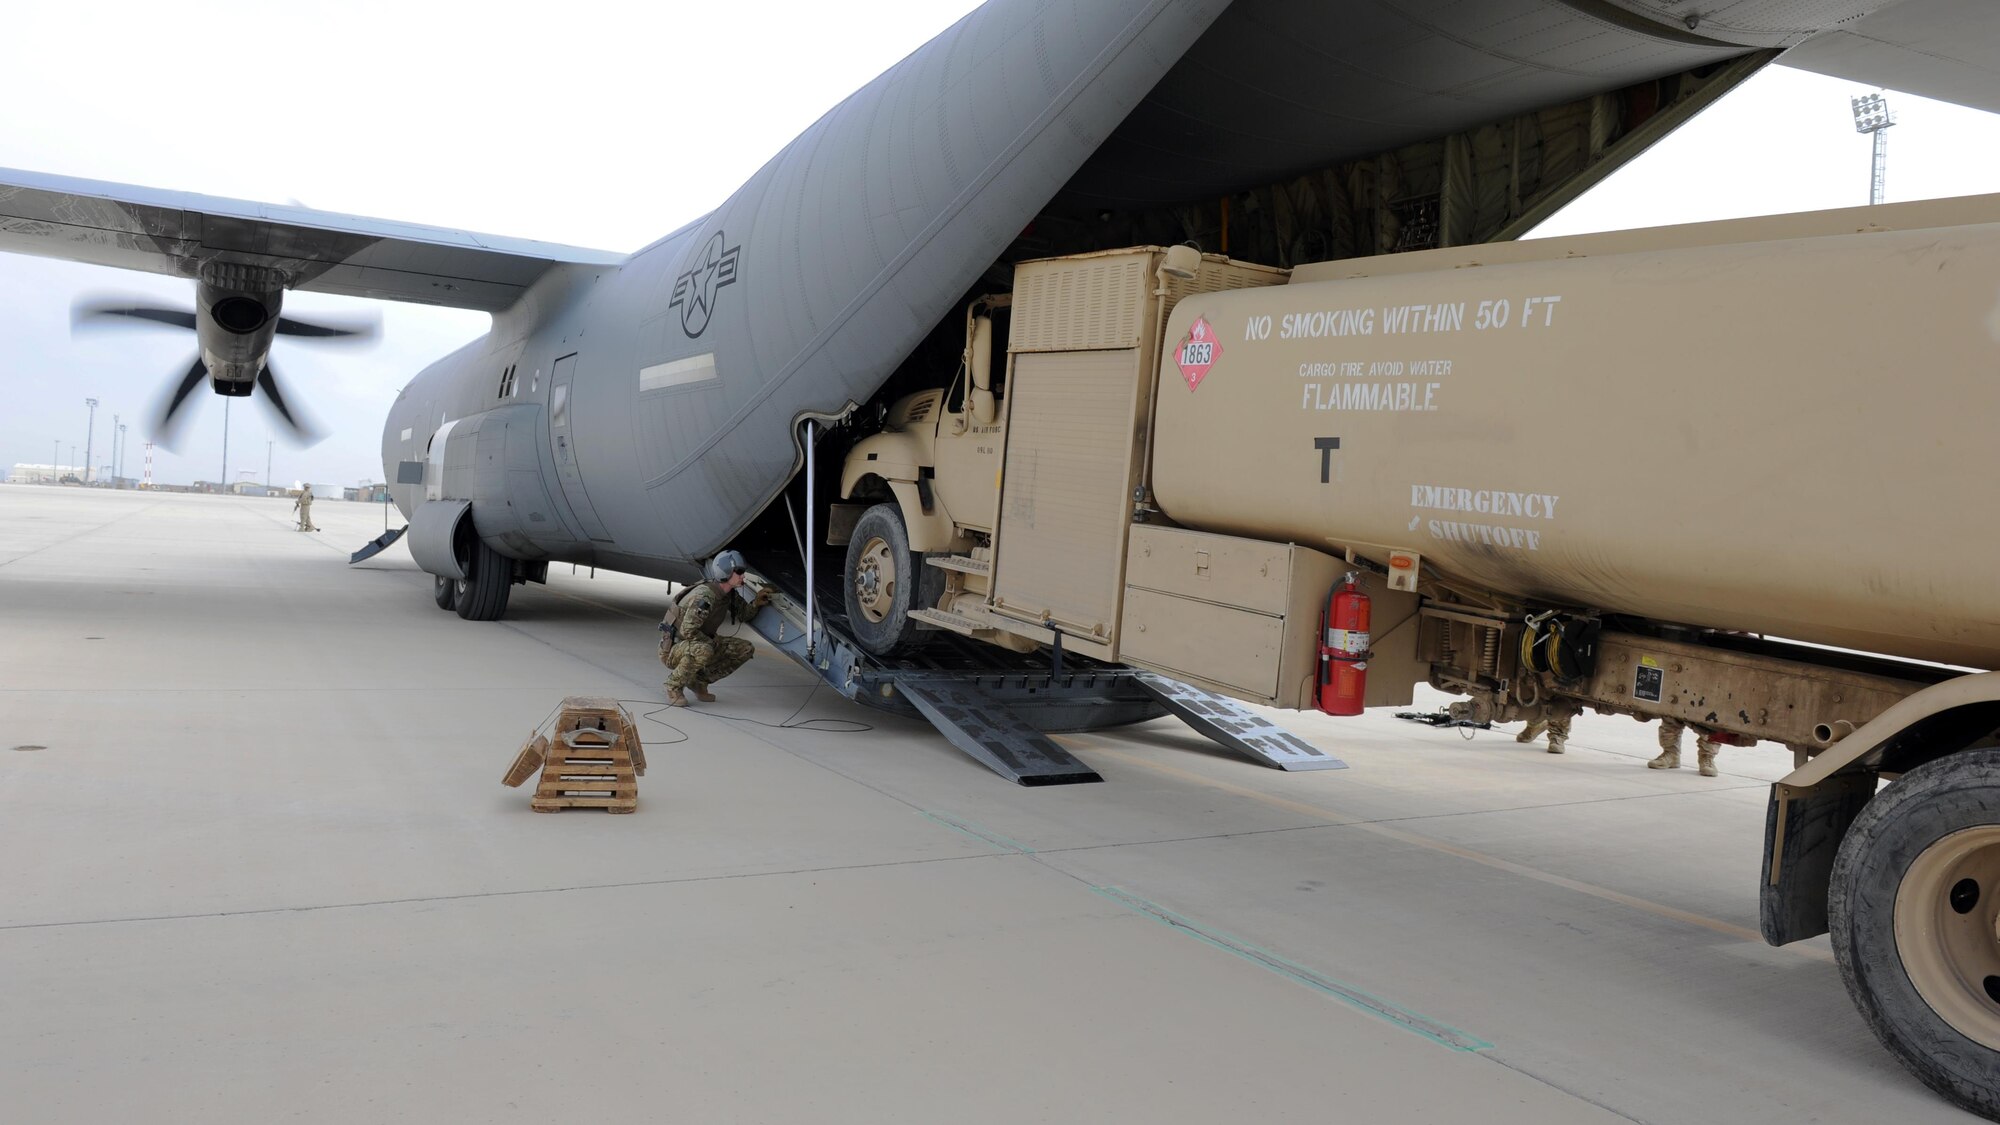 U.S. Air Force Lt. Col. Thomas Lankford, 774th Expeditionary Airlift Squadron commander, acts as a spotter as an R-11 fuel truck is loaded onto a C-130J Super Hercules aircraft during a redeployment mission at an undisclosed location in the Air Force Central Command area of responsibility March 15, 2015. The ability to forward deploy mission critical equipment, such as the R-11, to key sites throughout the AOR is more imperative than ever before as the Air Force reduces its footprint in the region. (U.S. Air Force photo by Staff Sgt. Whitney Amstutz)